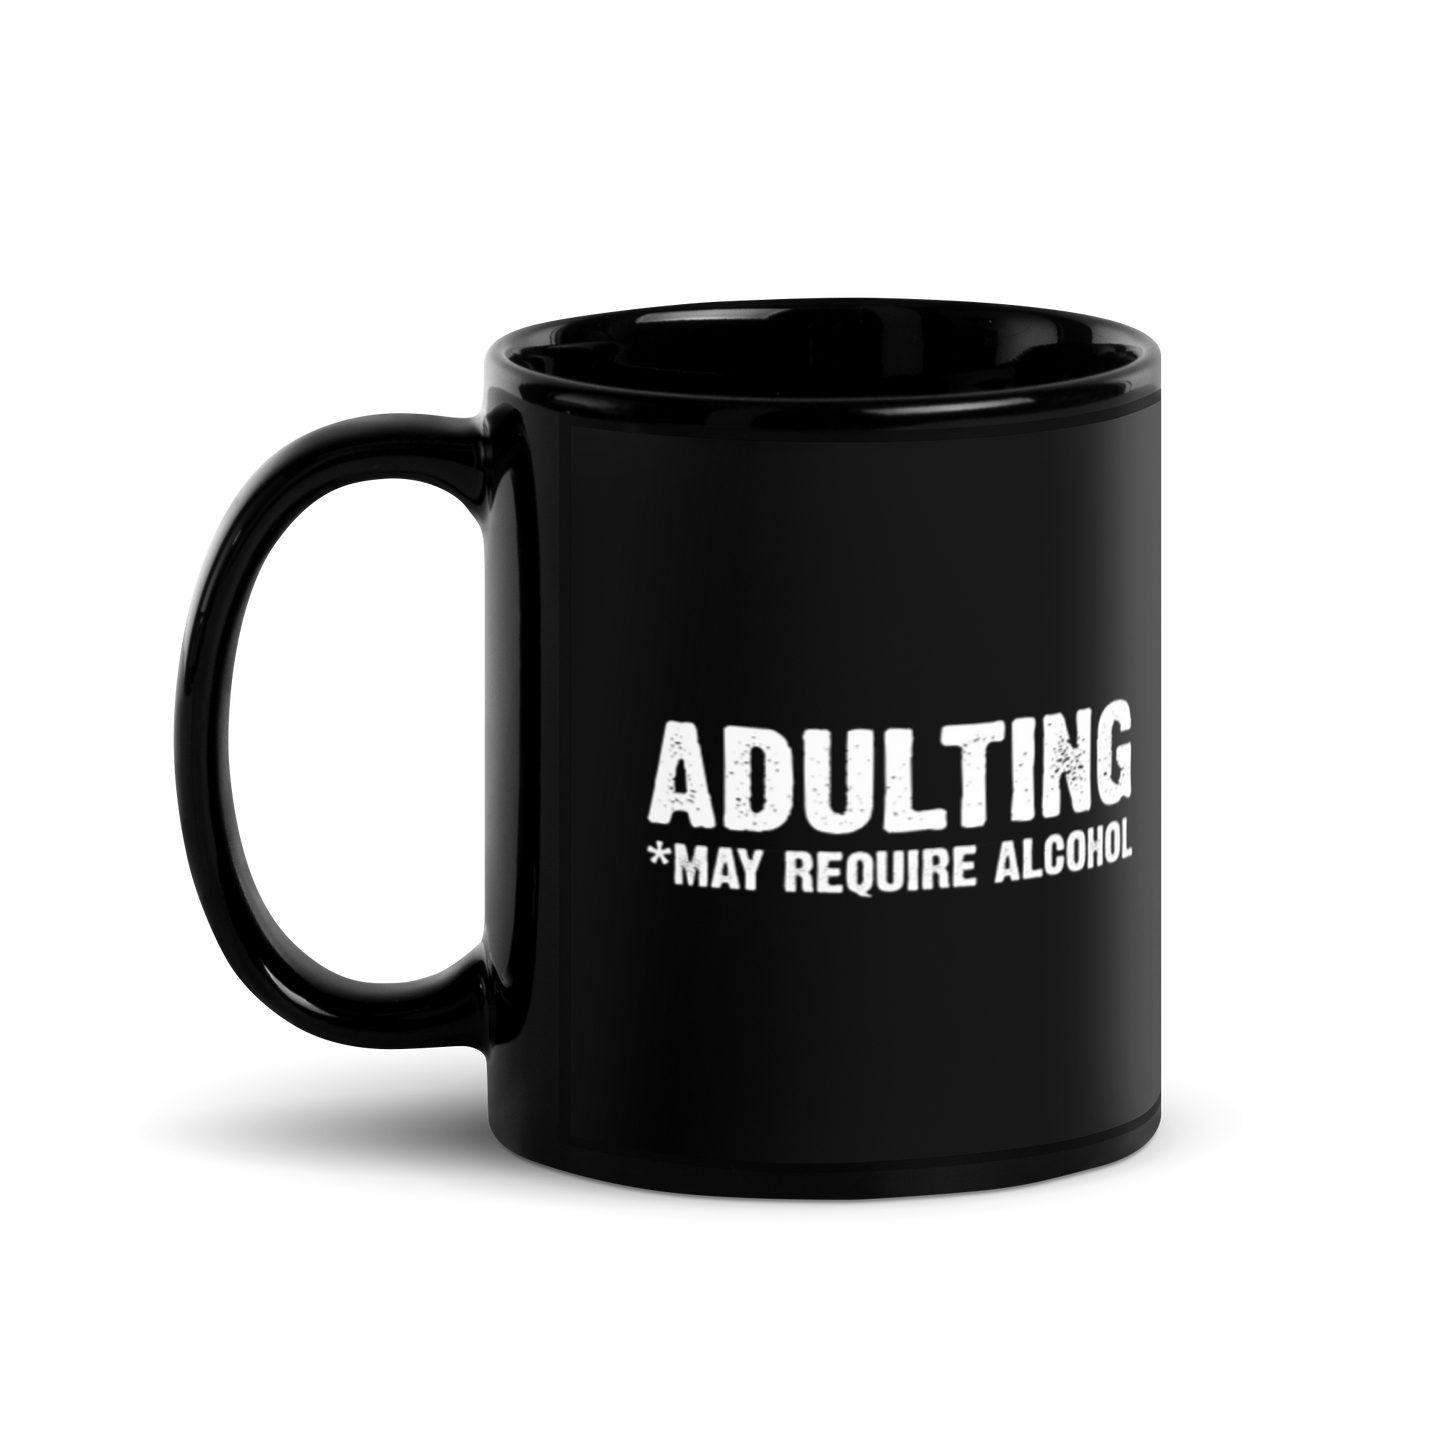 Adulting *May Require Alcohol - Funny Mug